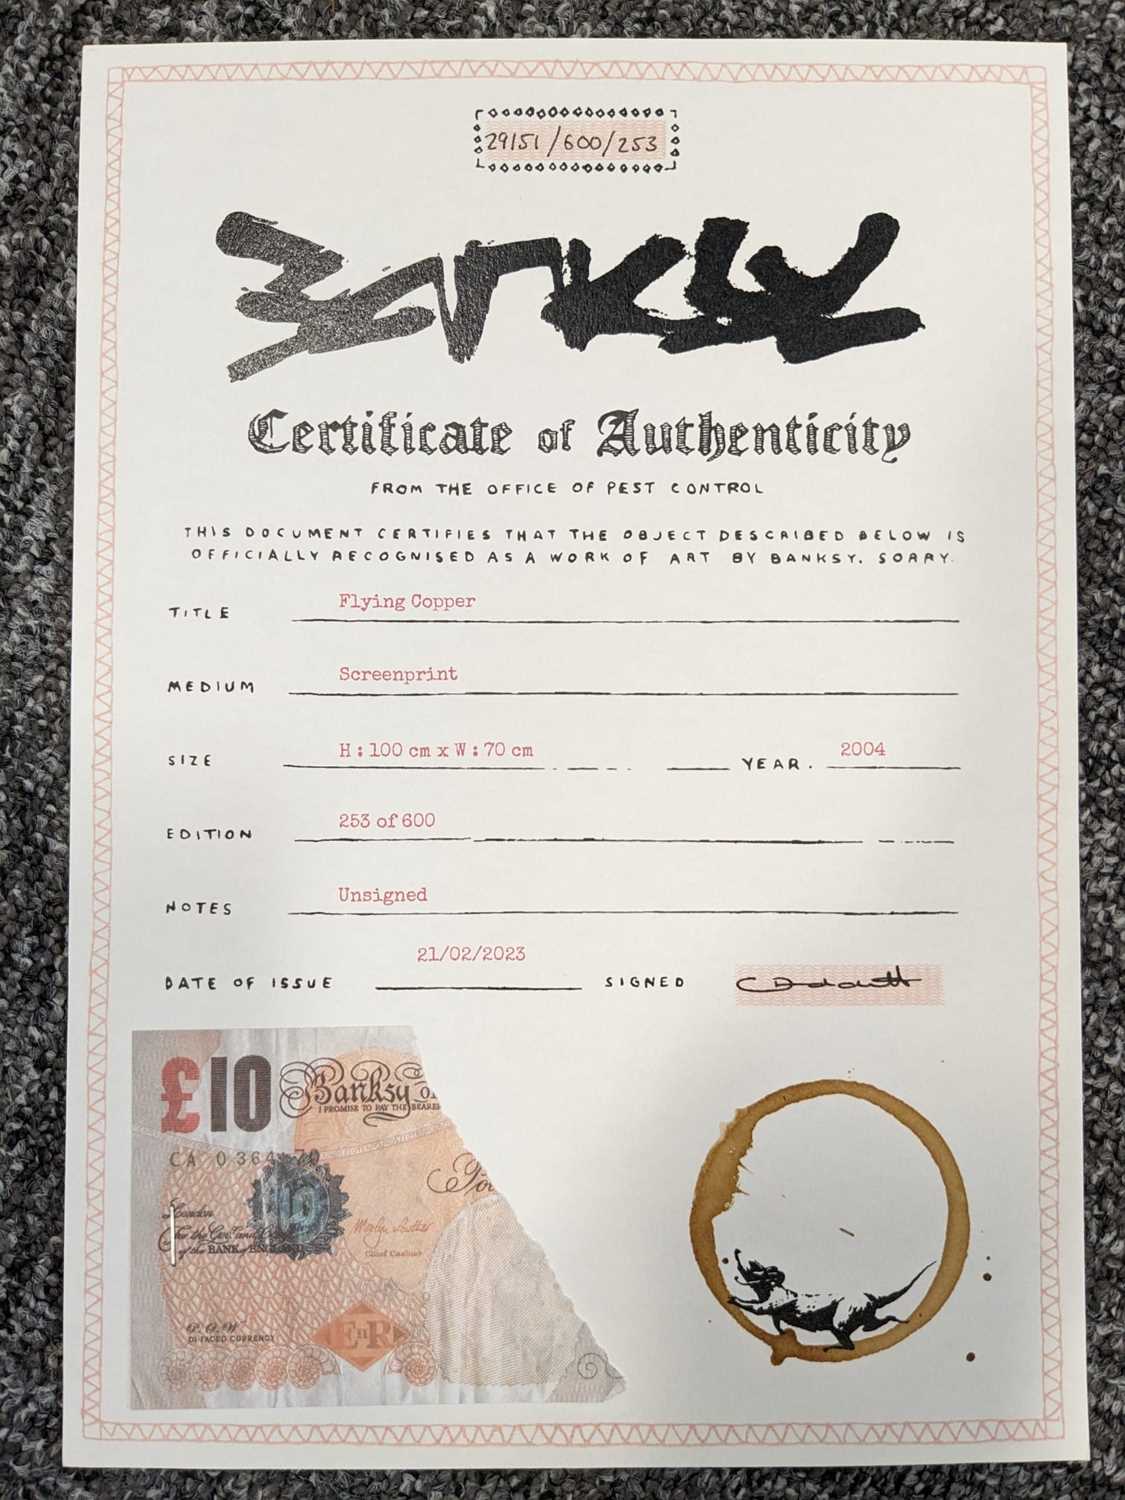 ‡ BANKSY (b.1974) limited edition (253/600) screenprint - Flying Copper, 2004, unsigned, 100 x 70cms - Image 2 of 3